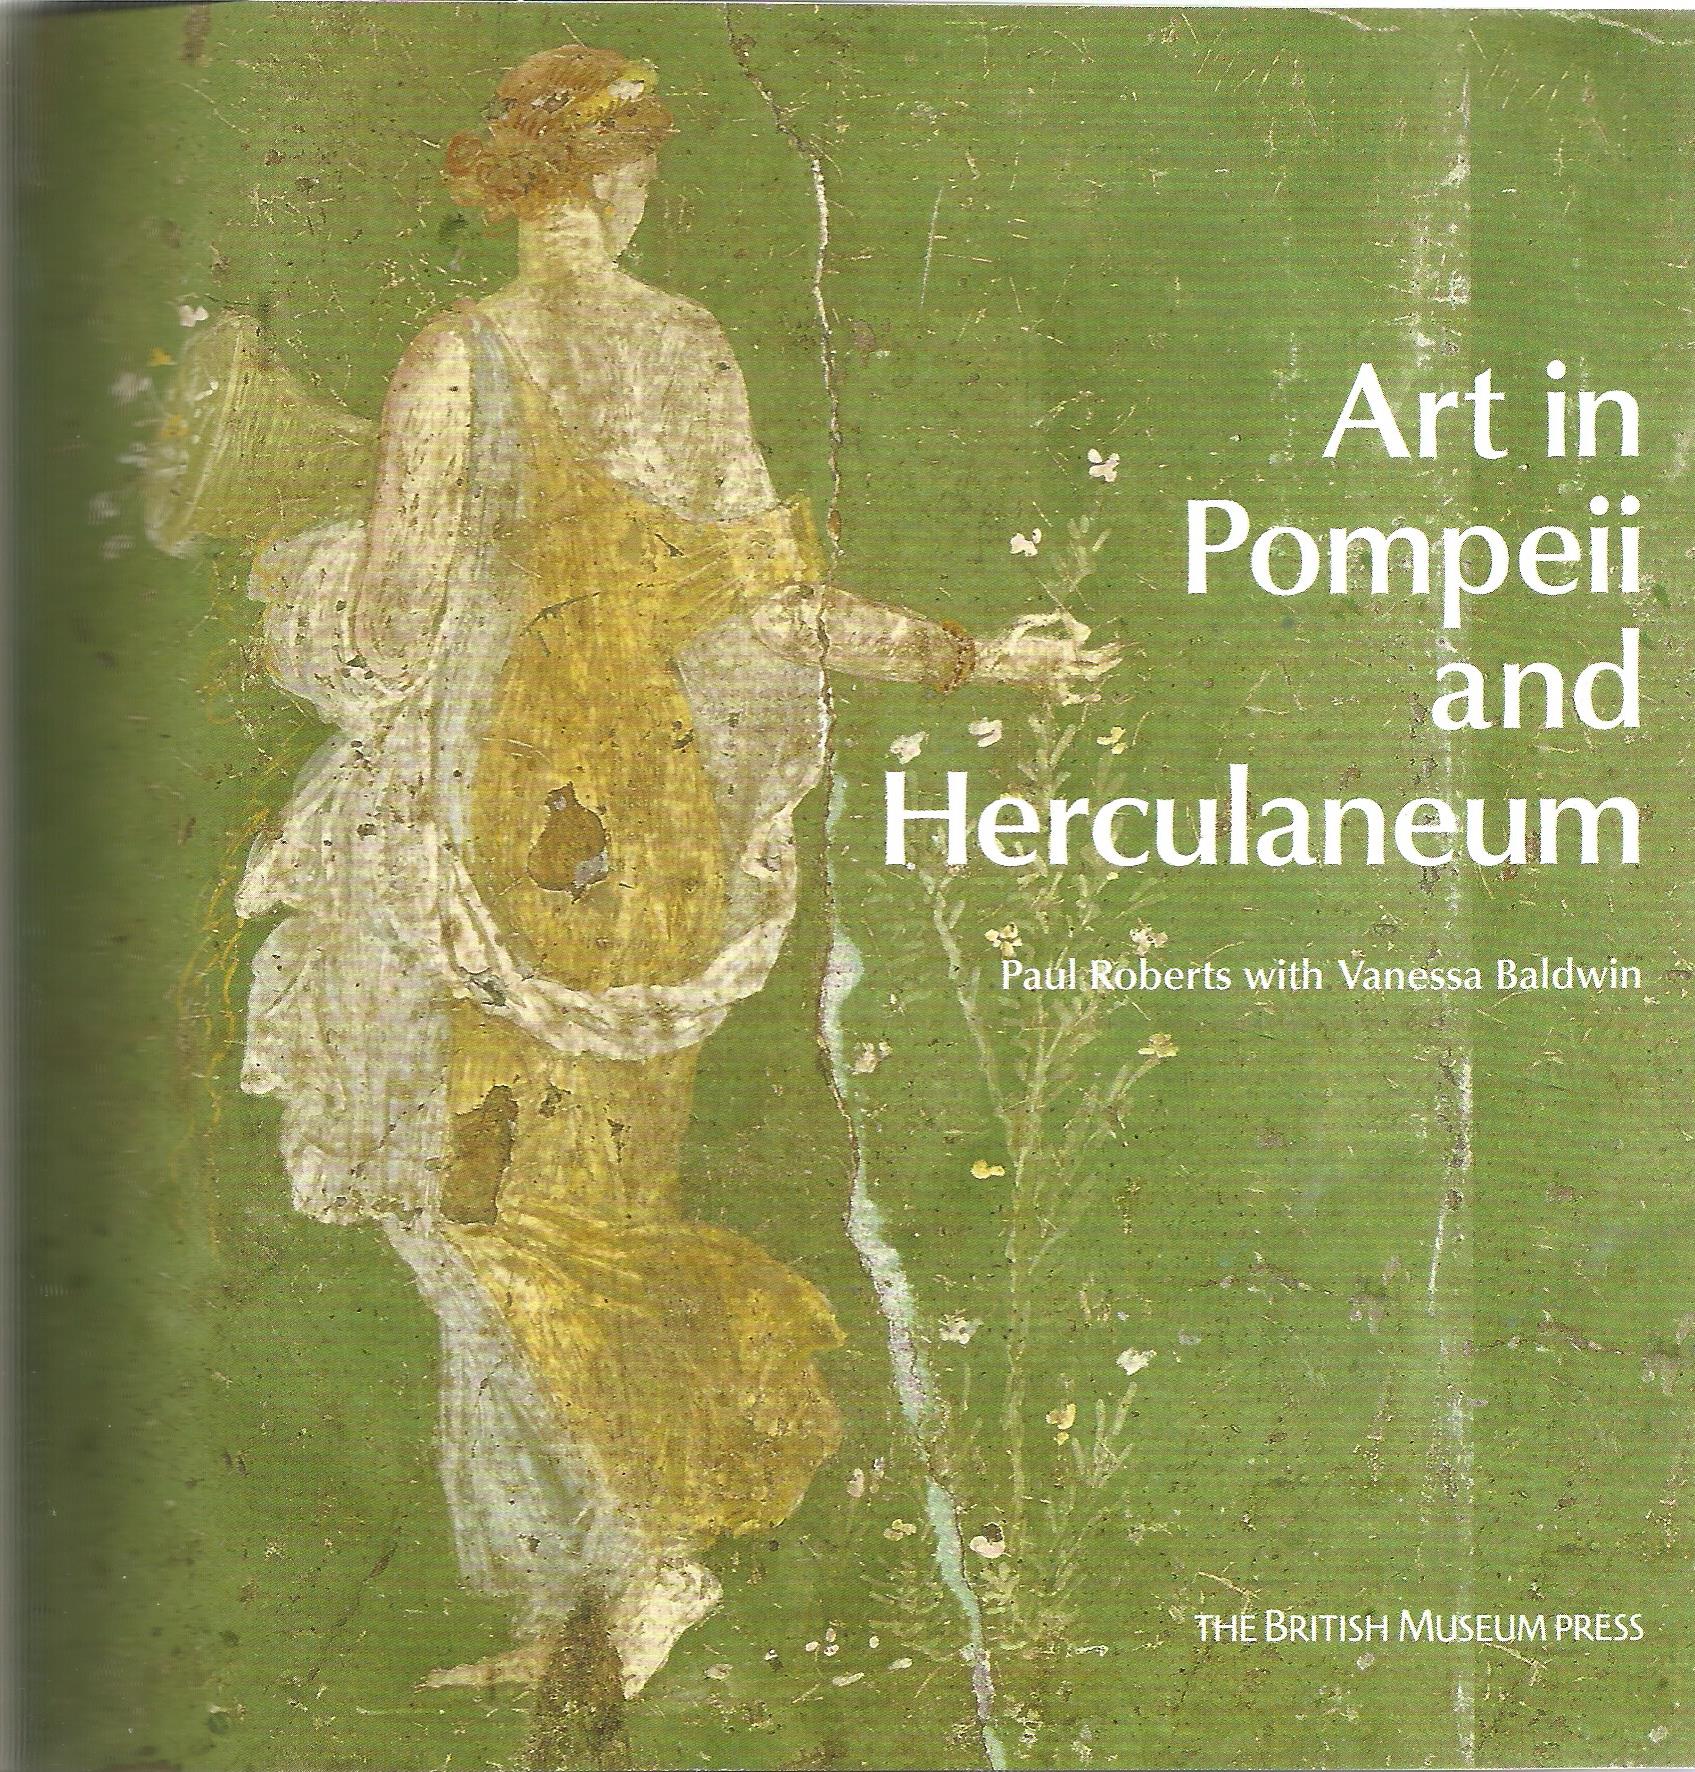 Art in Pompeii and Herculaneum by Paul Roberts with Vanessa Baldwin Softback Book 2013 published - Image 2 of 3